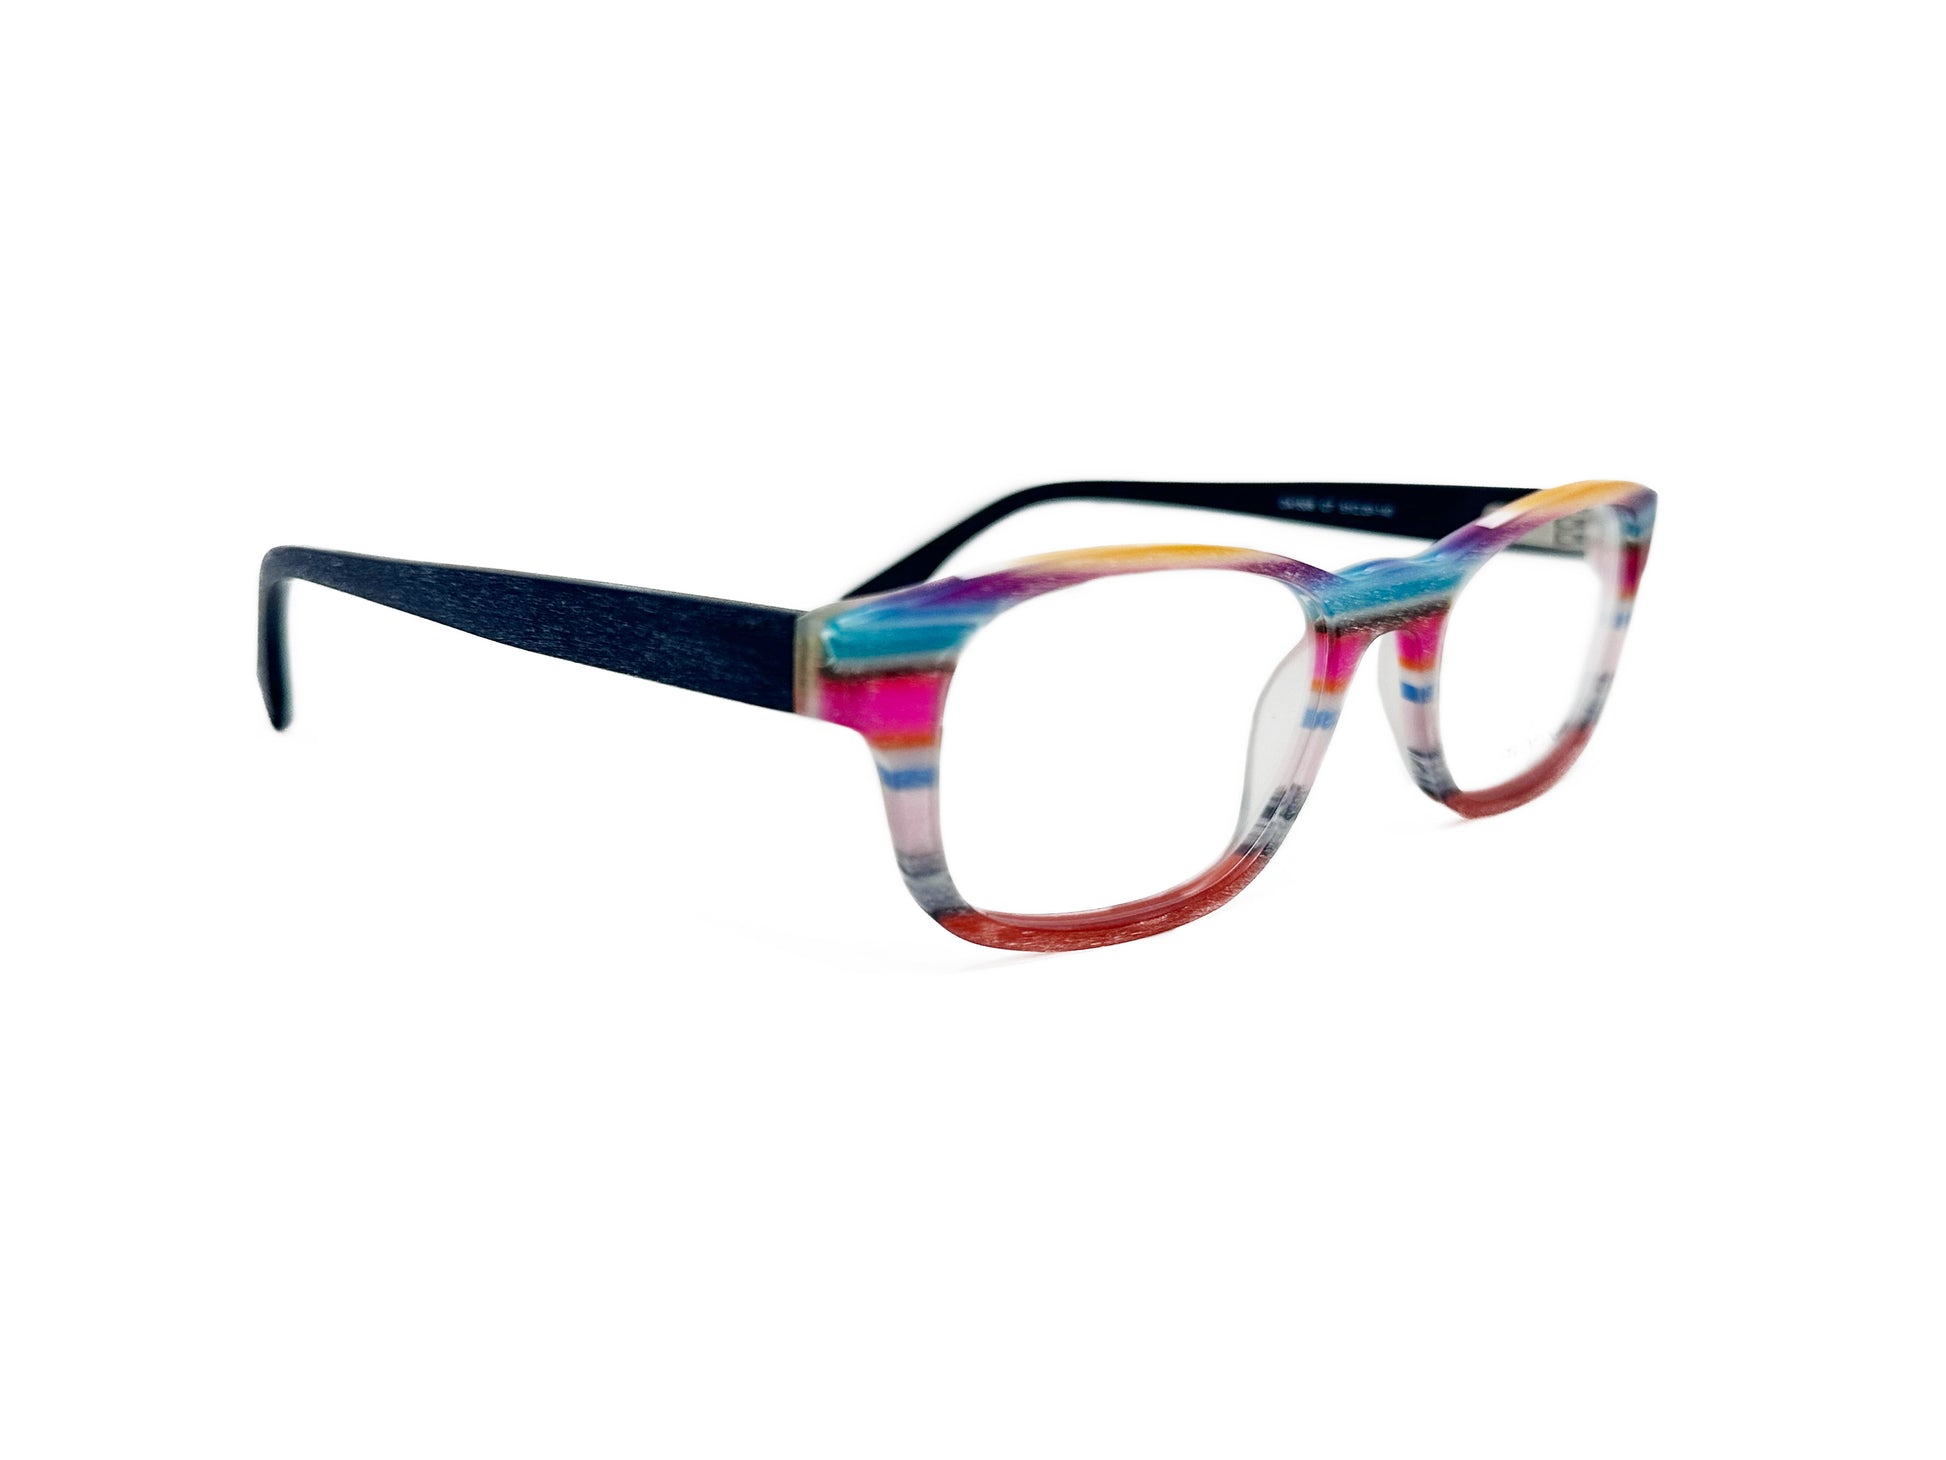 Outspoken rectangular acetate optical frame. Model: OA1508. Color: C& - red, blue, yellow stripes. Side view.